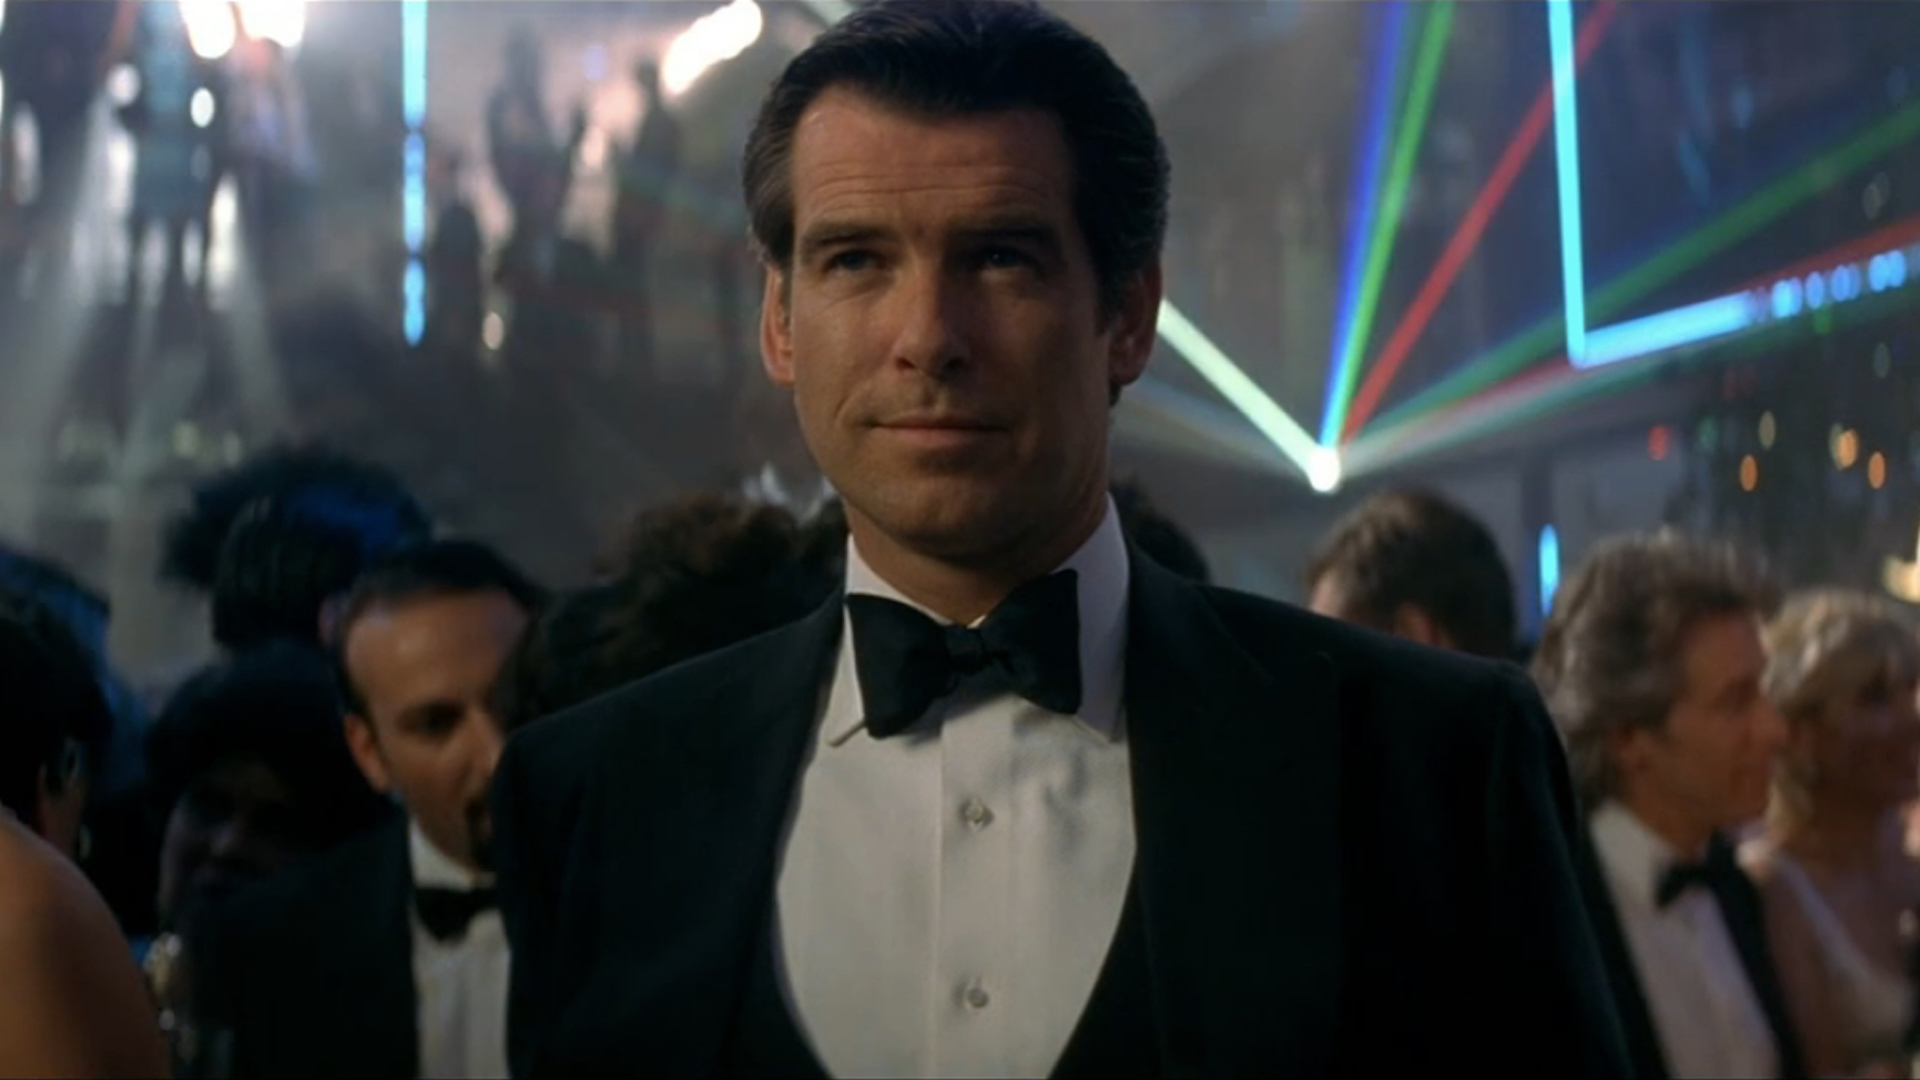 The actors that inspired Pierce Brosnan to pursue his dream